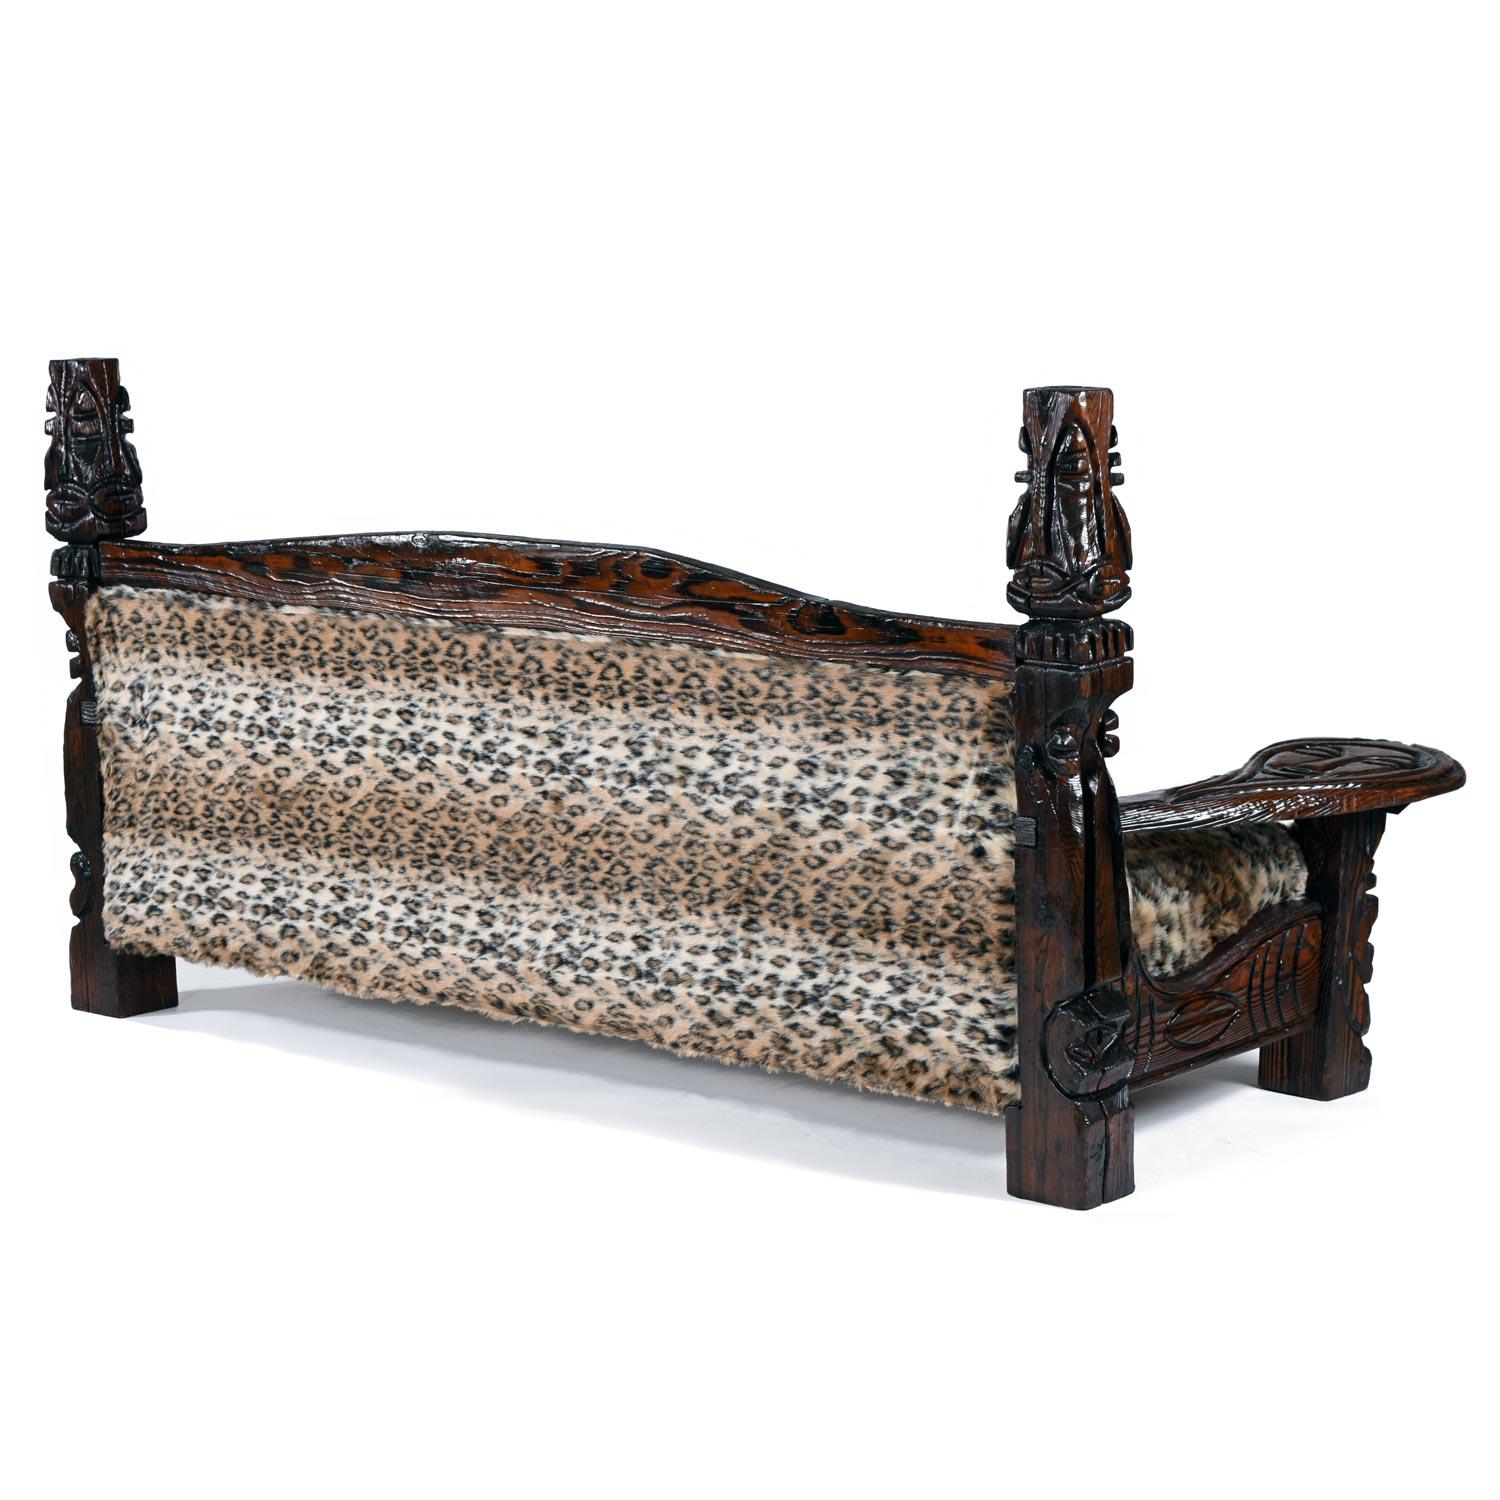 Take a walk on the wild side, or maybe just have a seat there with scepter in hand. This Witco Sofa has been recovered in high-quality, cruelty free, faux-fur that very much resembles the look and feel of leopard fur. Every inch of the wood frame is